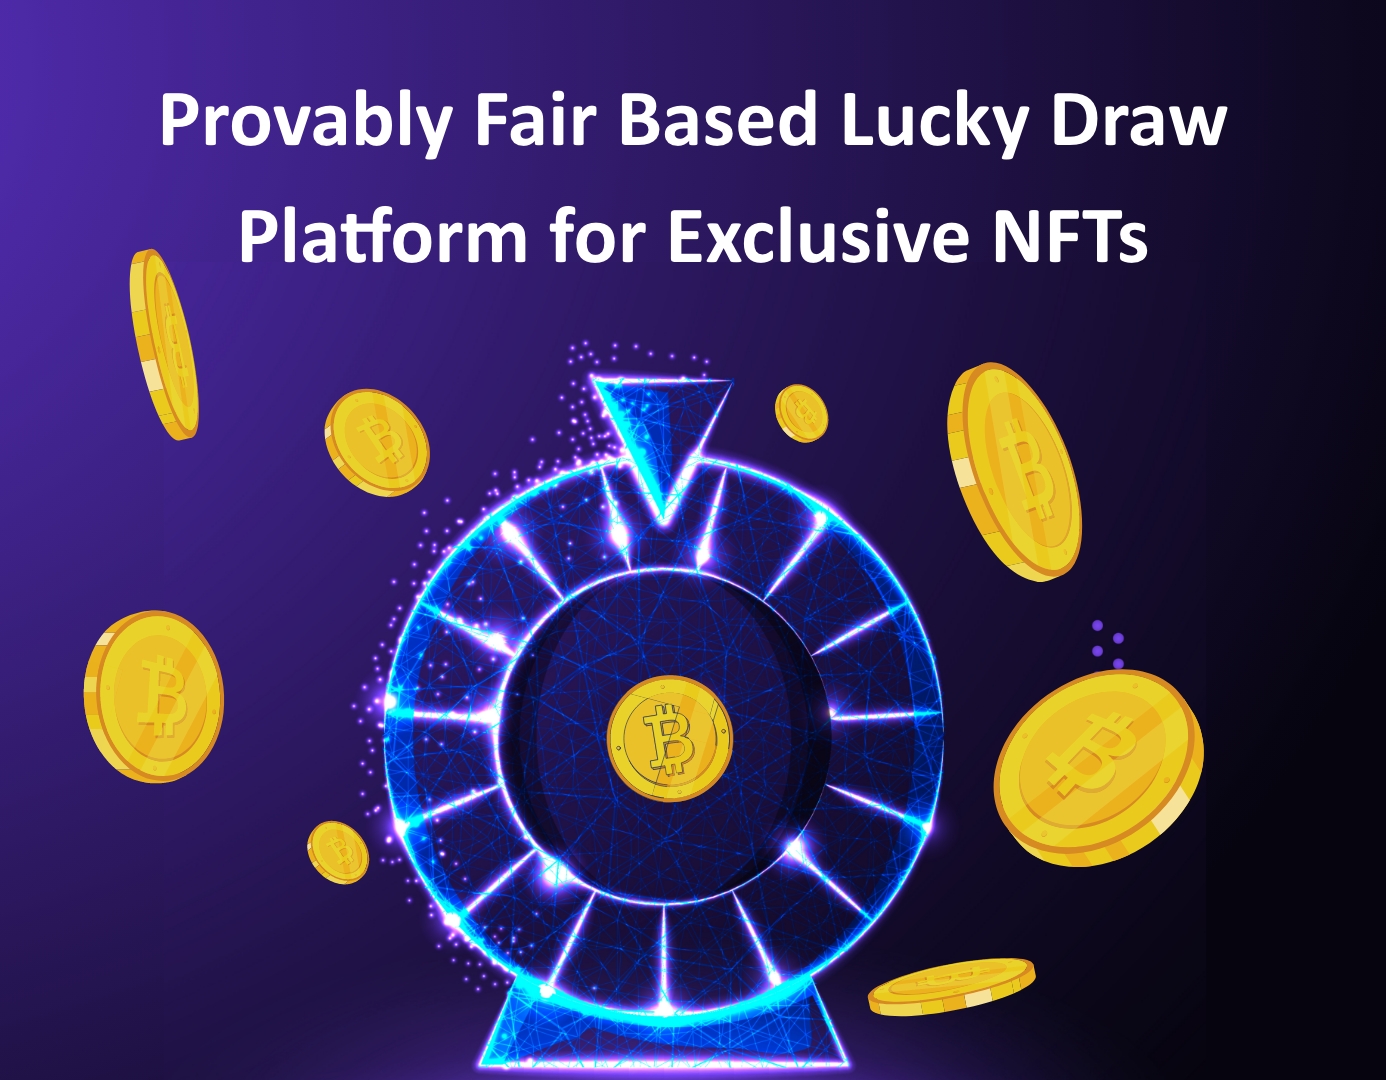 Provably fair lucky draw platform for exclusive NFTs, ensuring transparency and fairness in the selection process